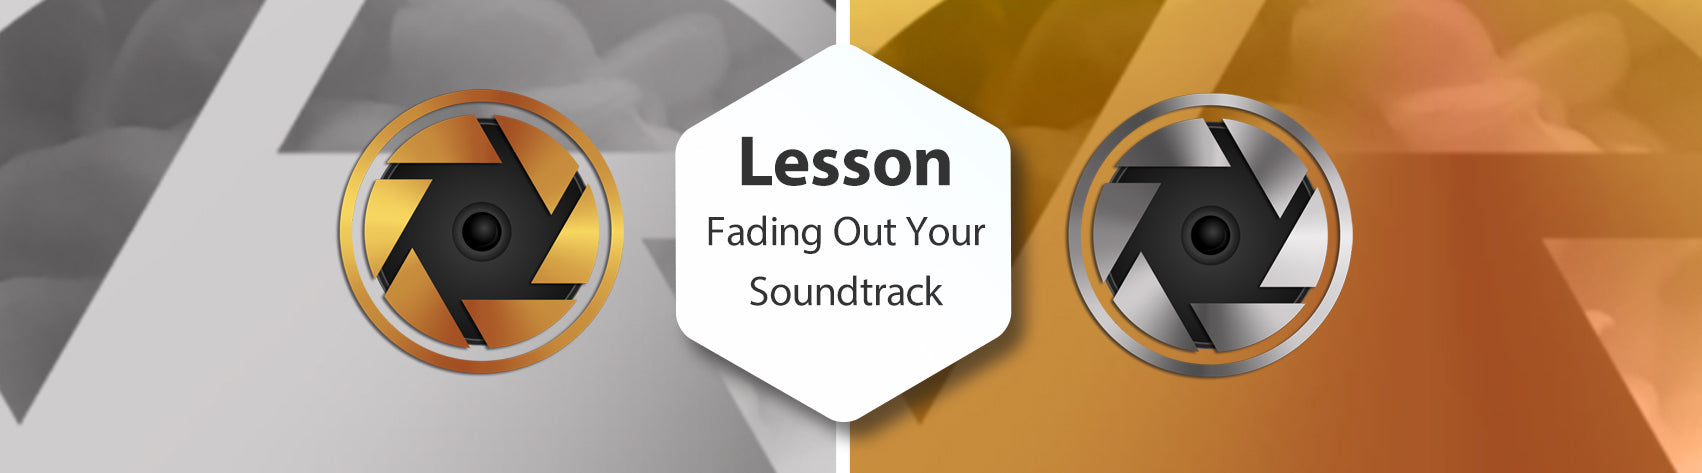 Lesson - Fading Out Your Soundtrack